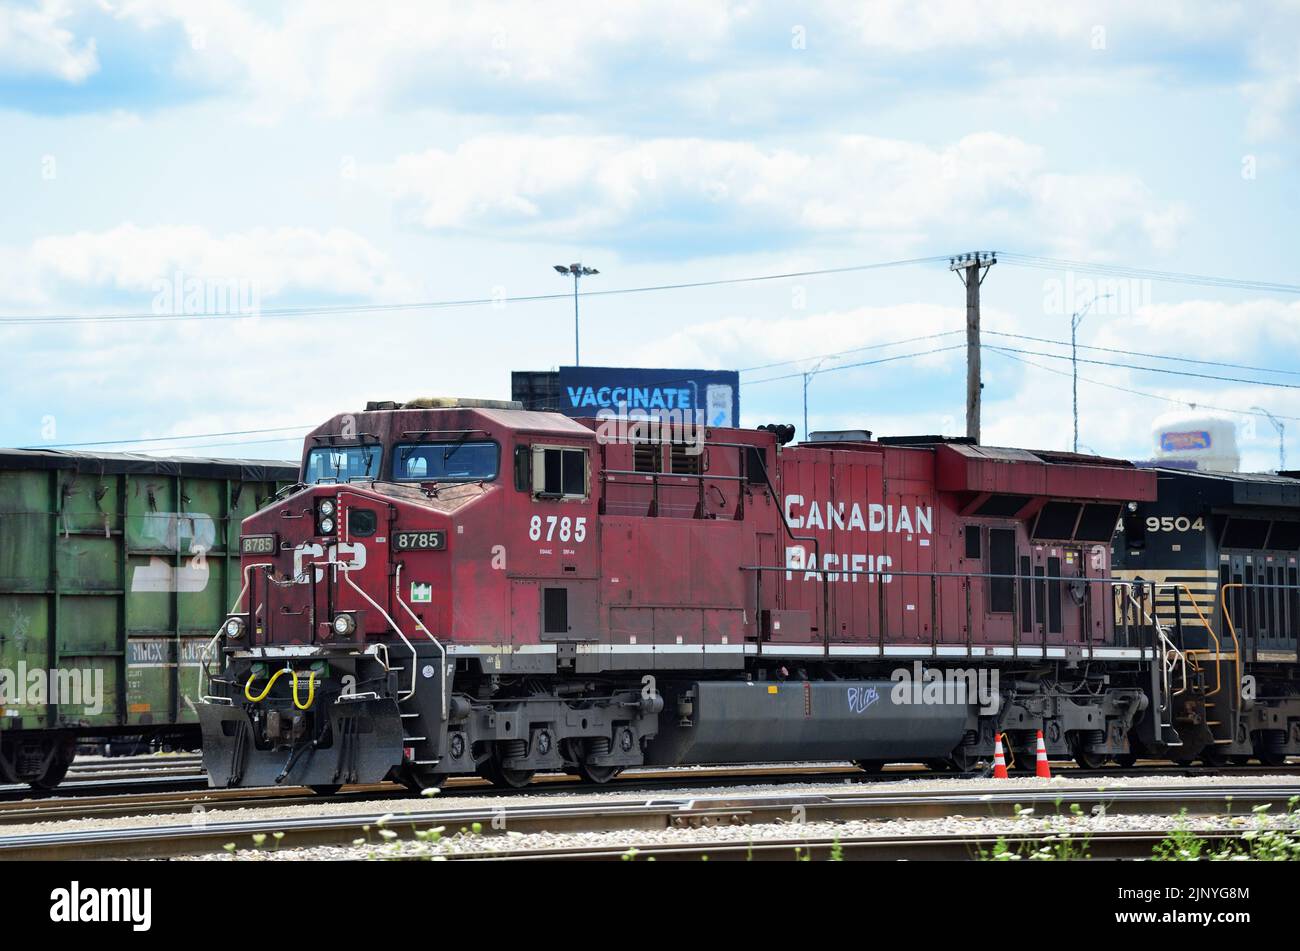 Franklin Park, Illinois, USA. Locomotives leading a freight train awaiting its departure from the Canadian Pacific Railway's Bensenville Yard. Stock Photo